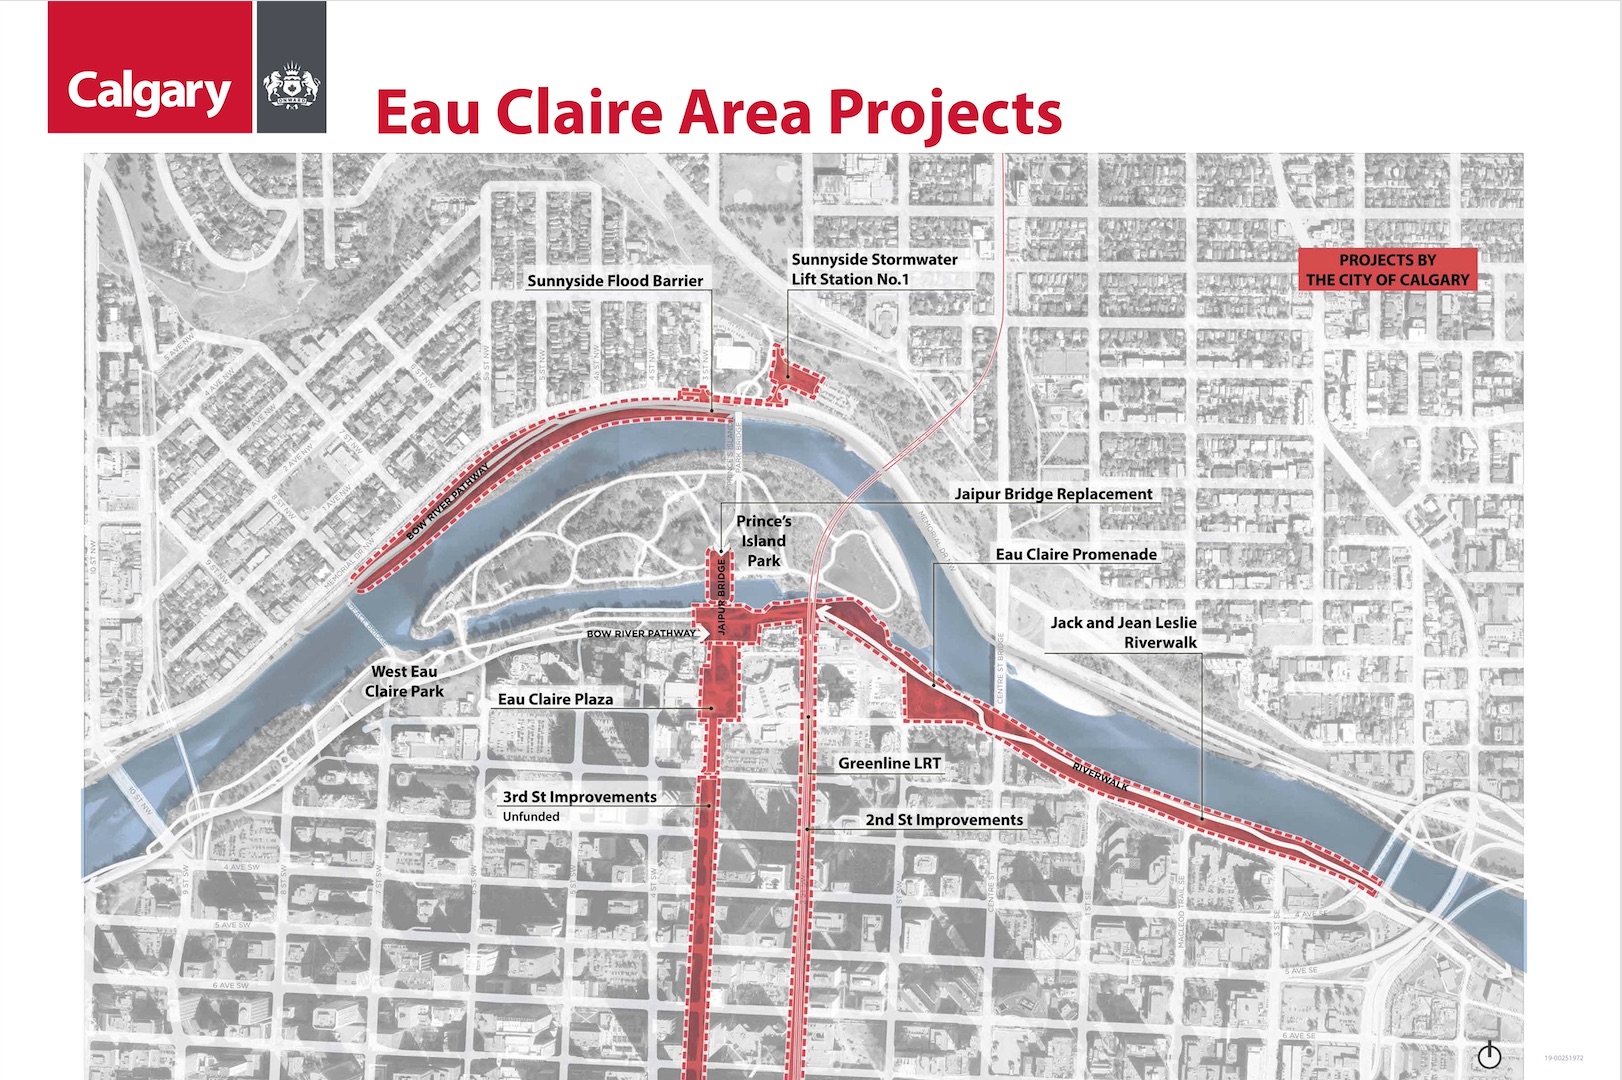 Eau-Claire-Area-Projects-small.jpg